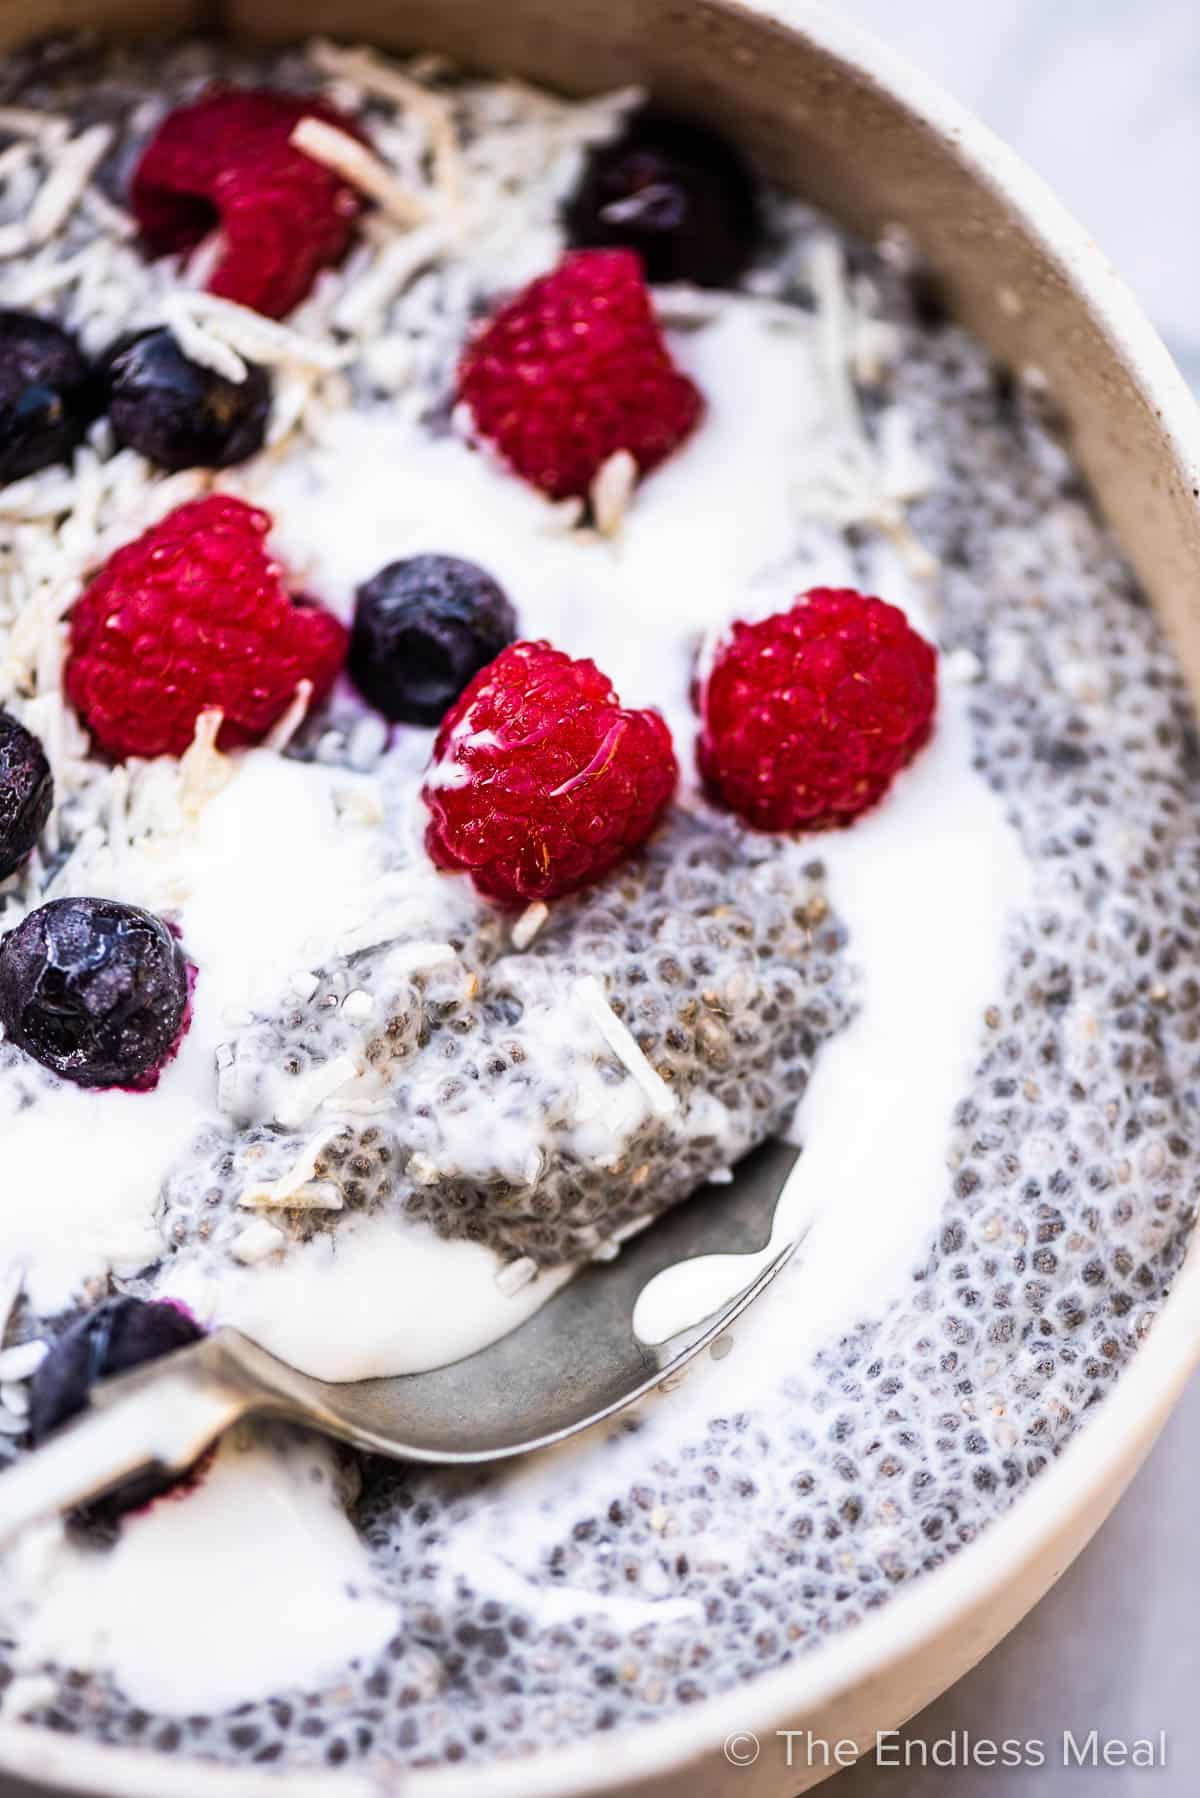 A closeup of a spoon scooping some coconut chia seed pudding.